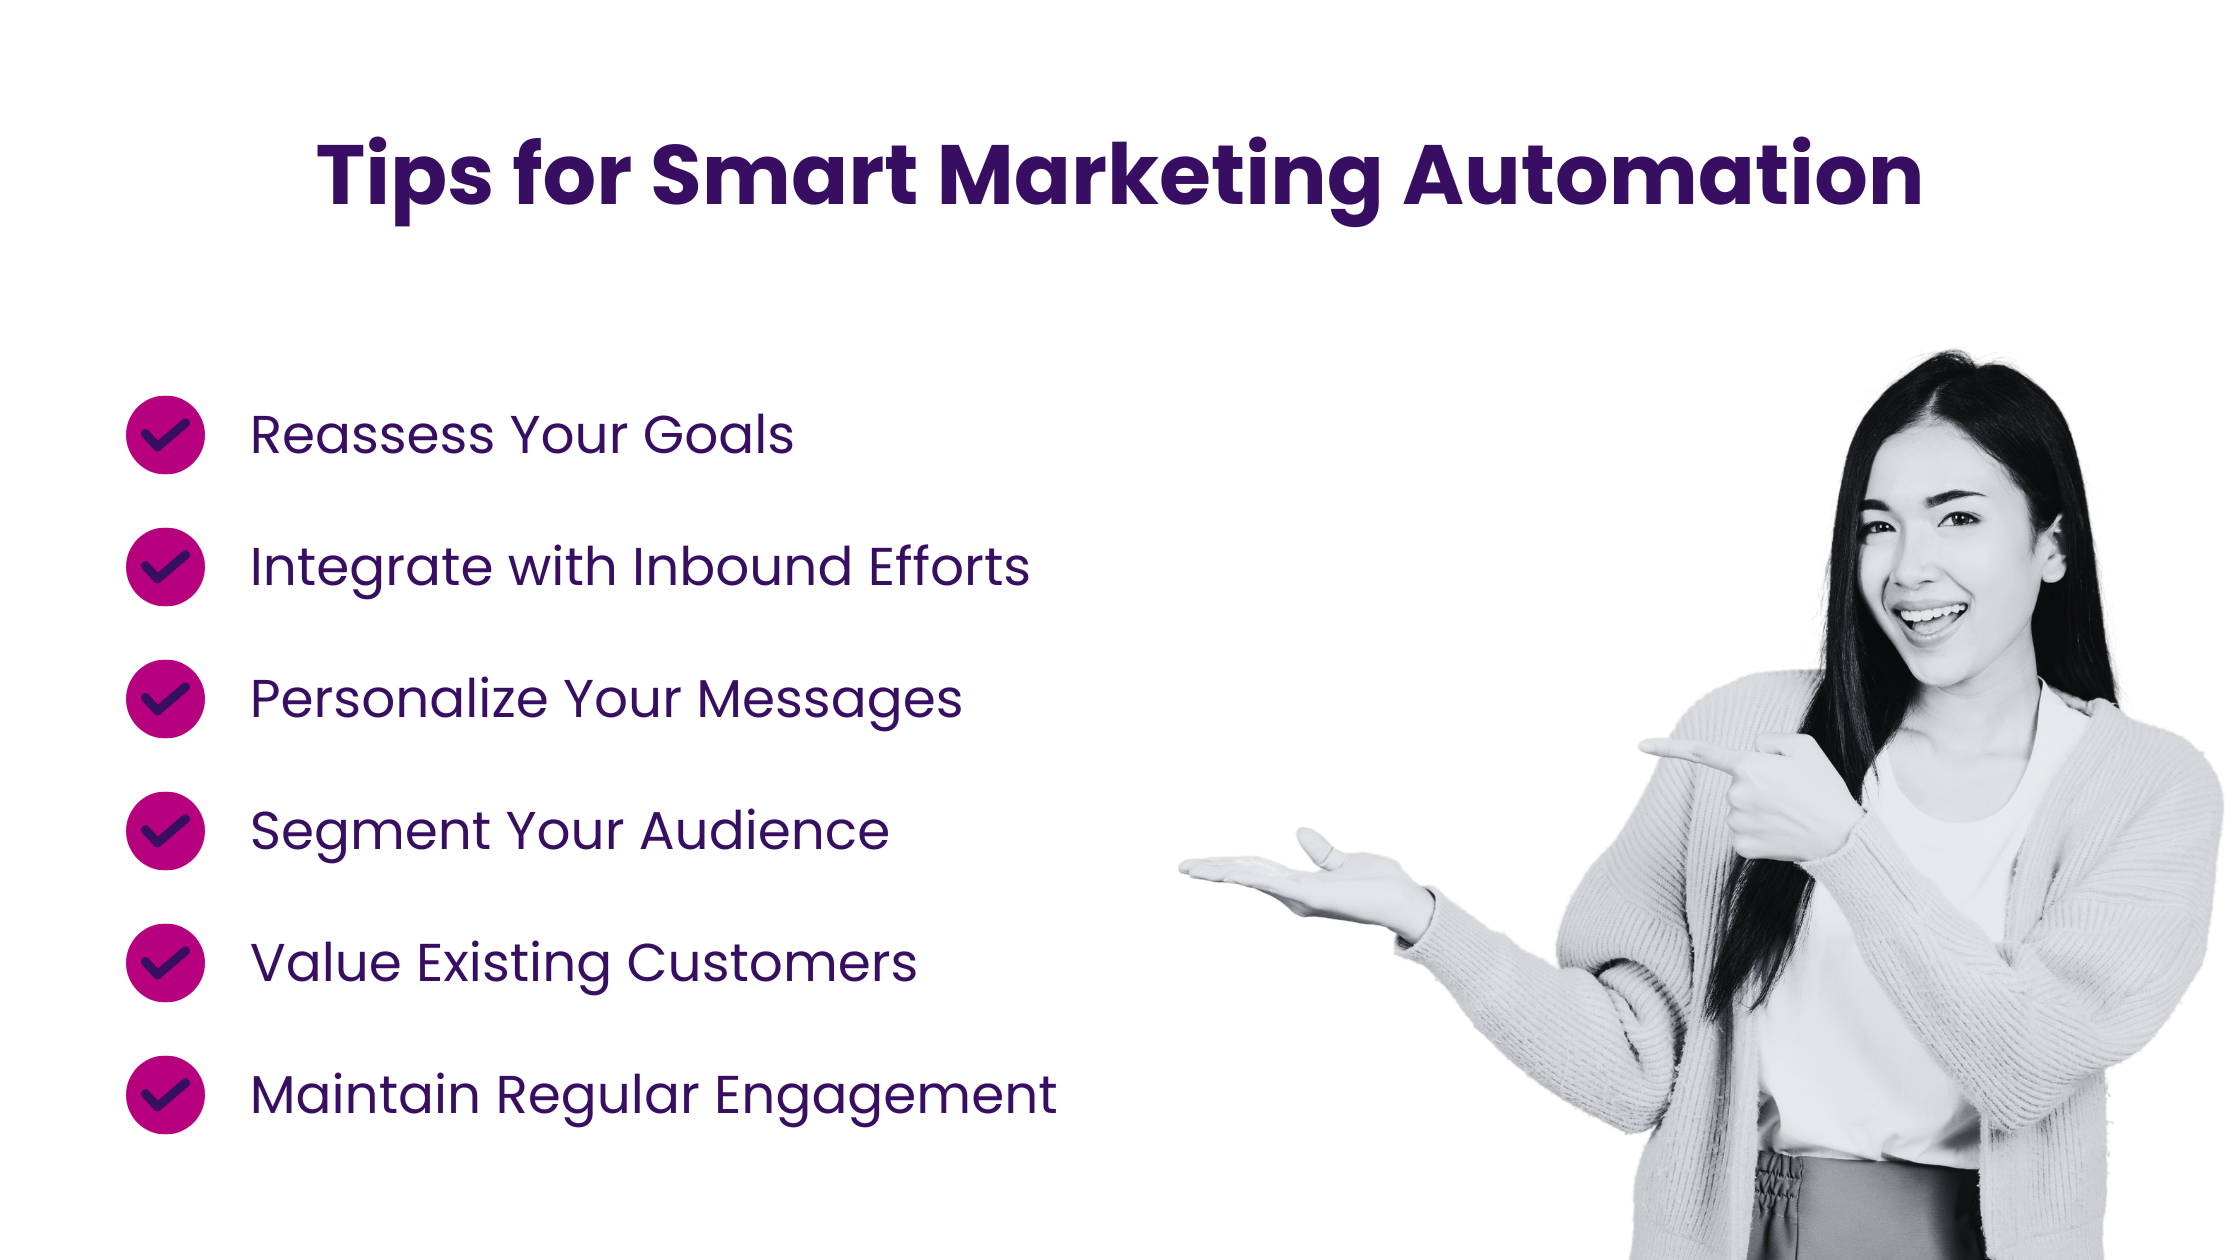 Tips for Smart Marketing Automation